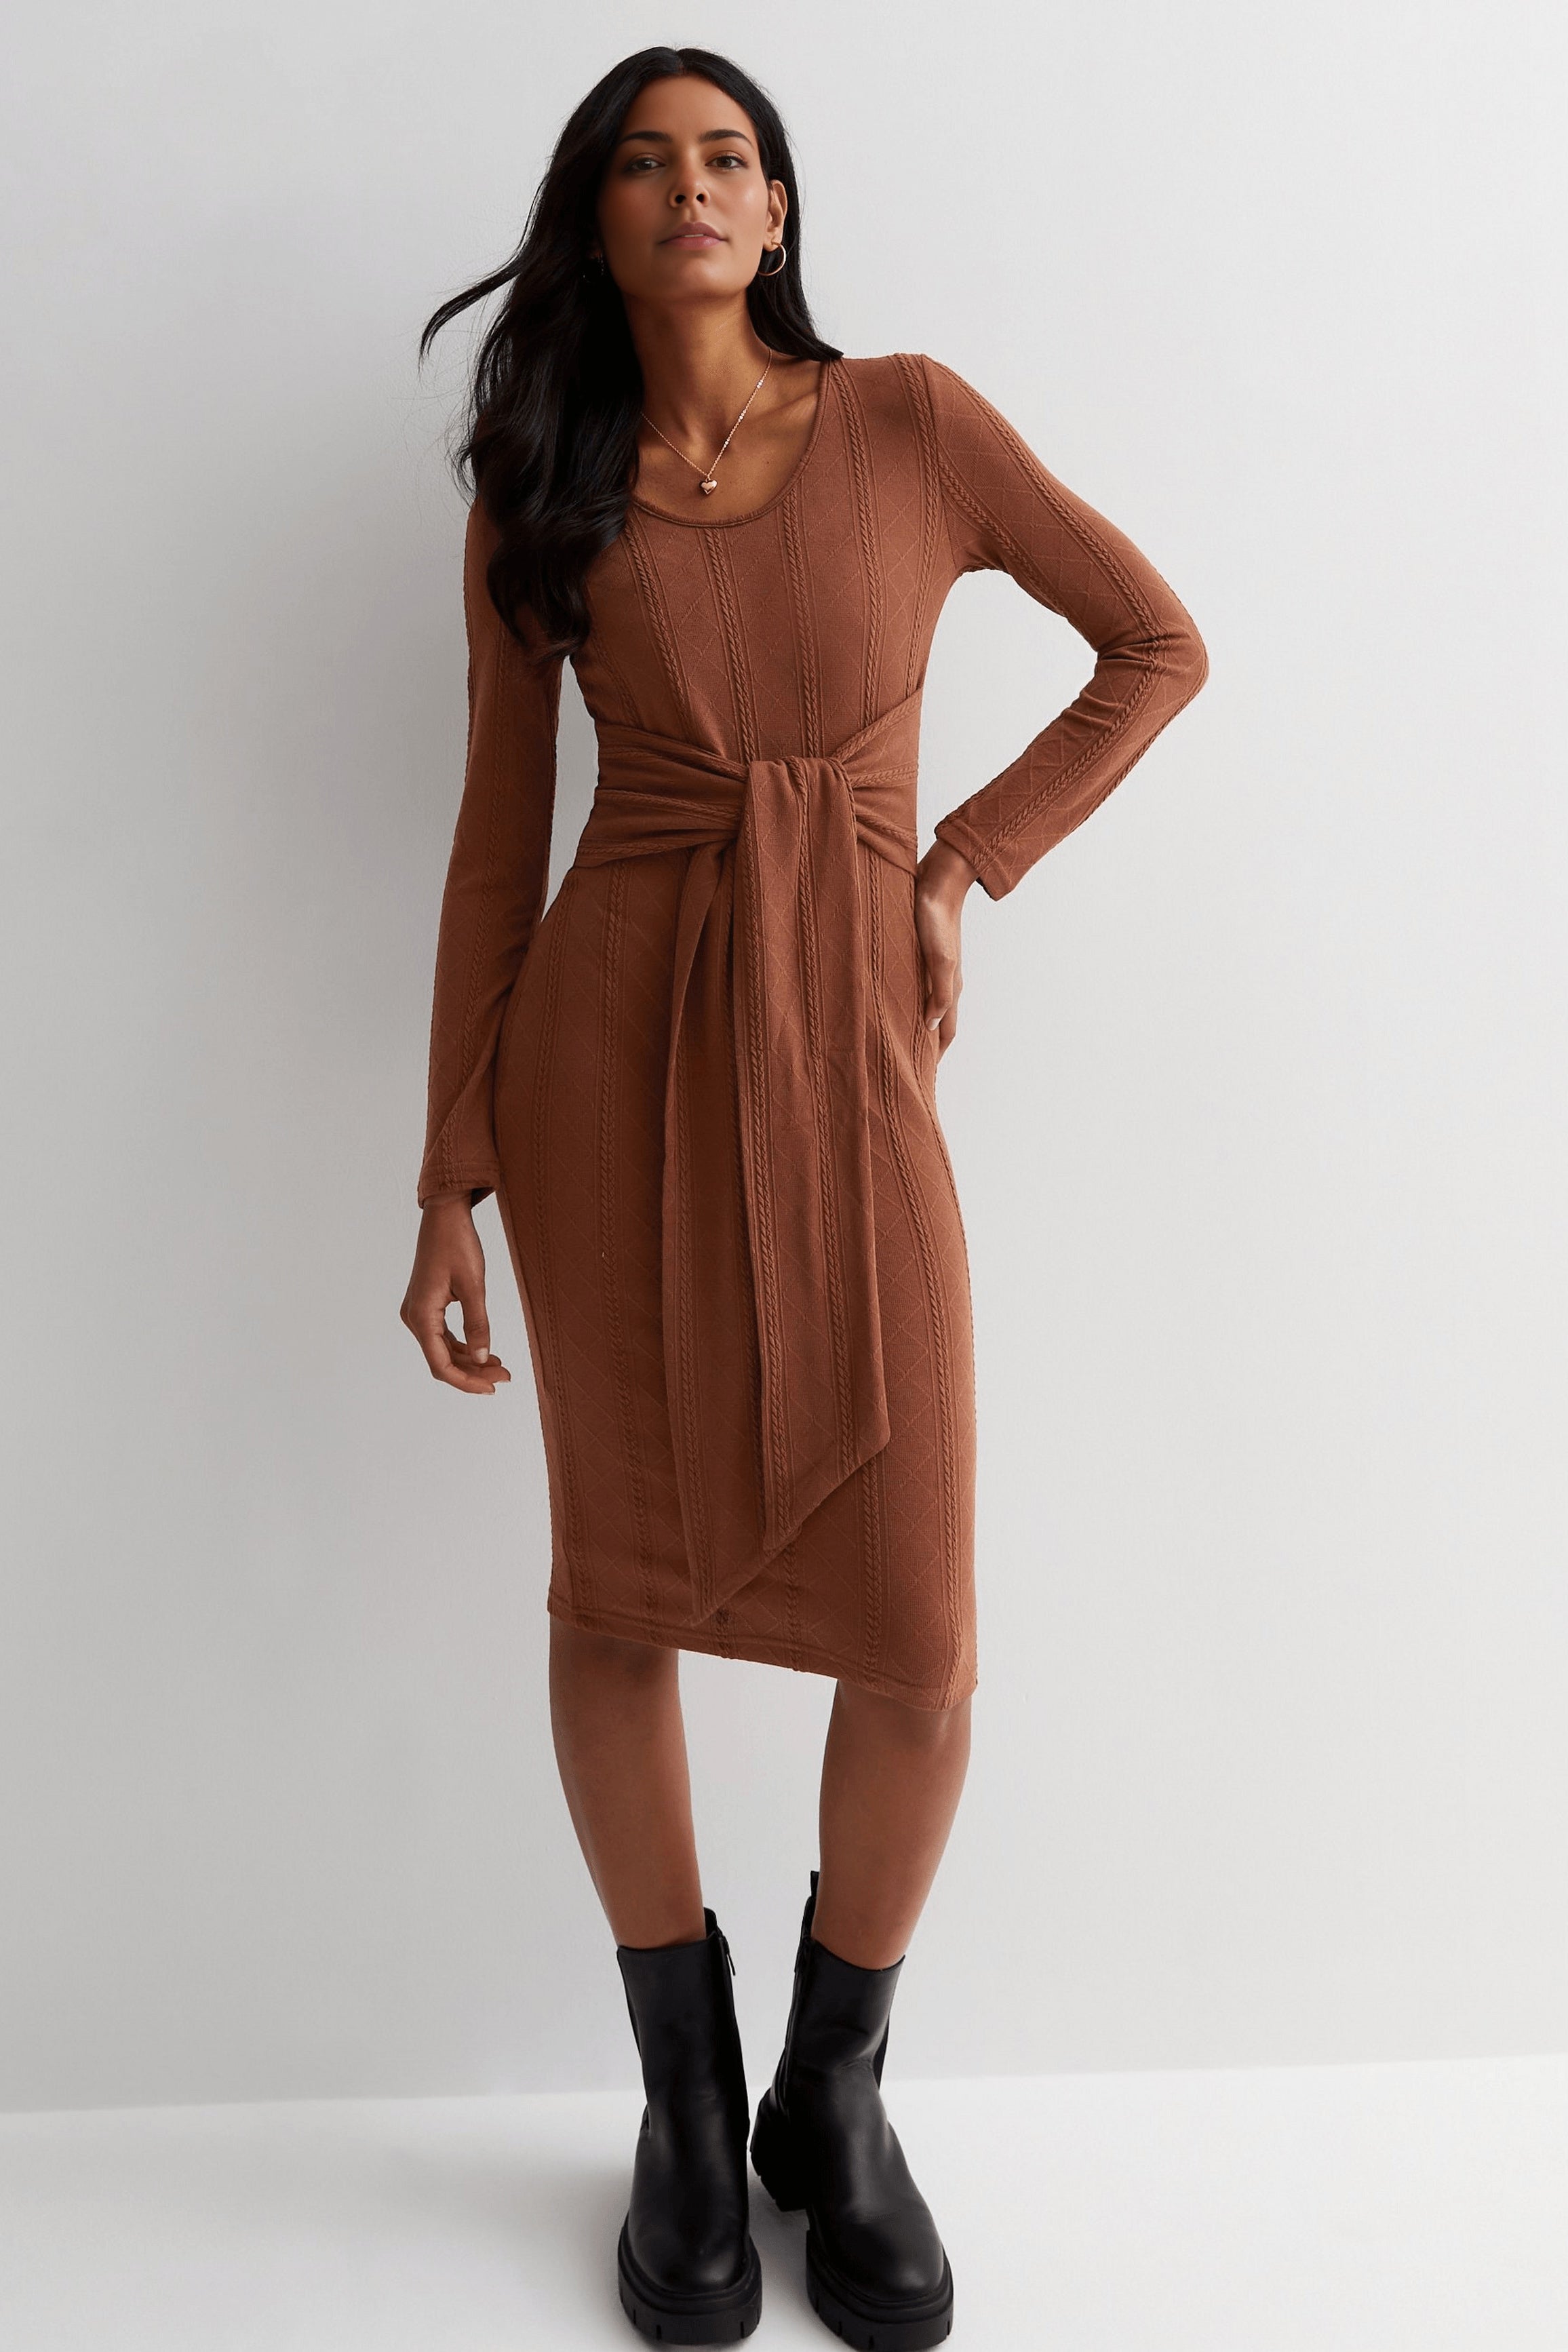 Front Tie Bodycon Knit Dress - BROWN